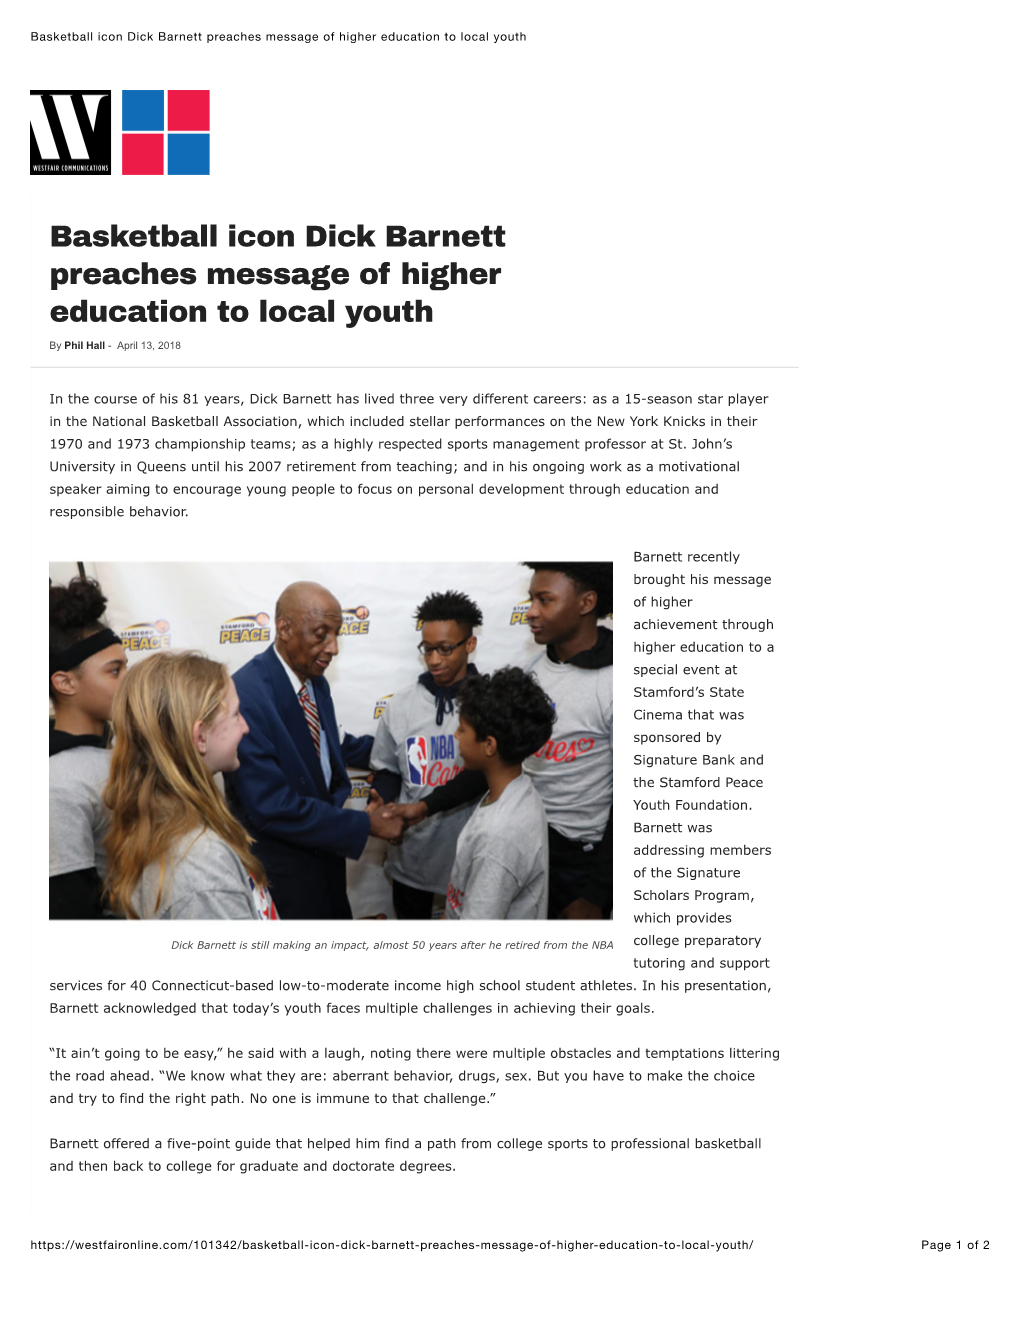 Basketball Icon Dick Barnett Preaches Message of Higher Education to Local Youth 4/23/18, 9:35 PM